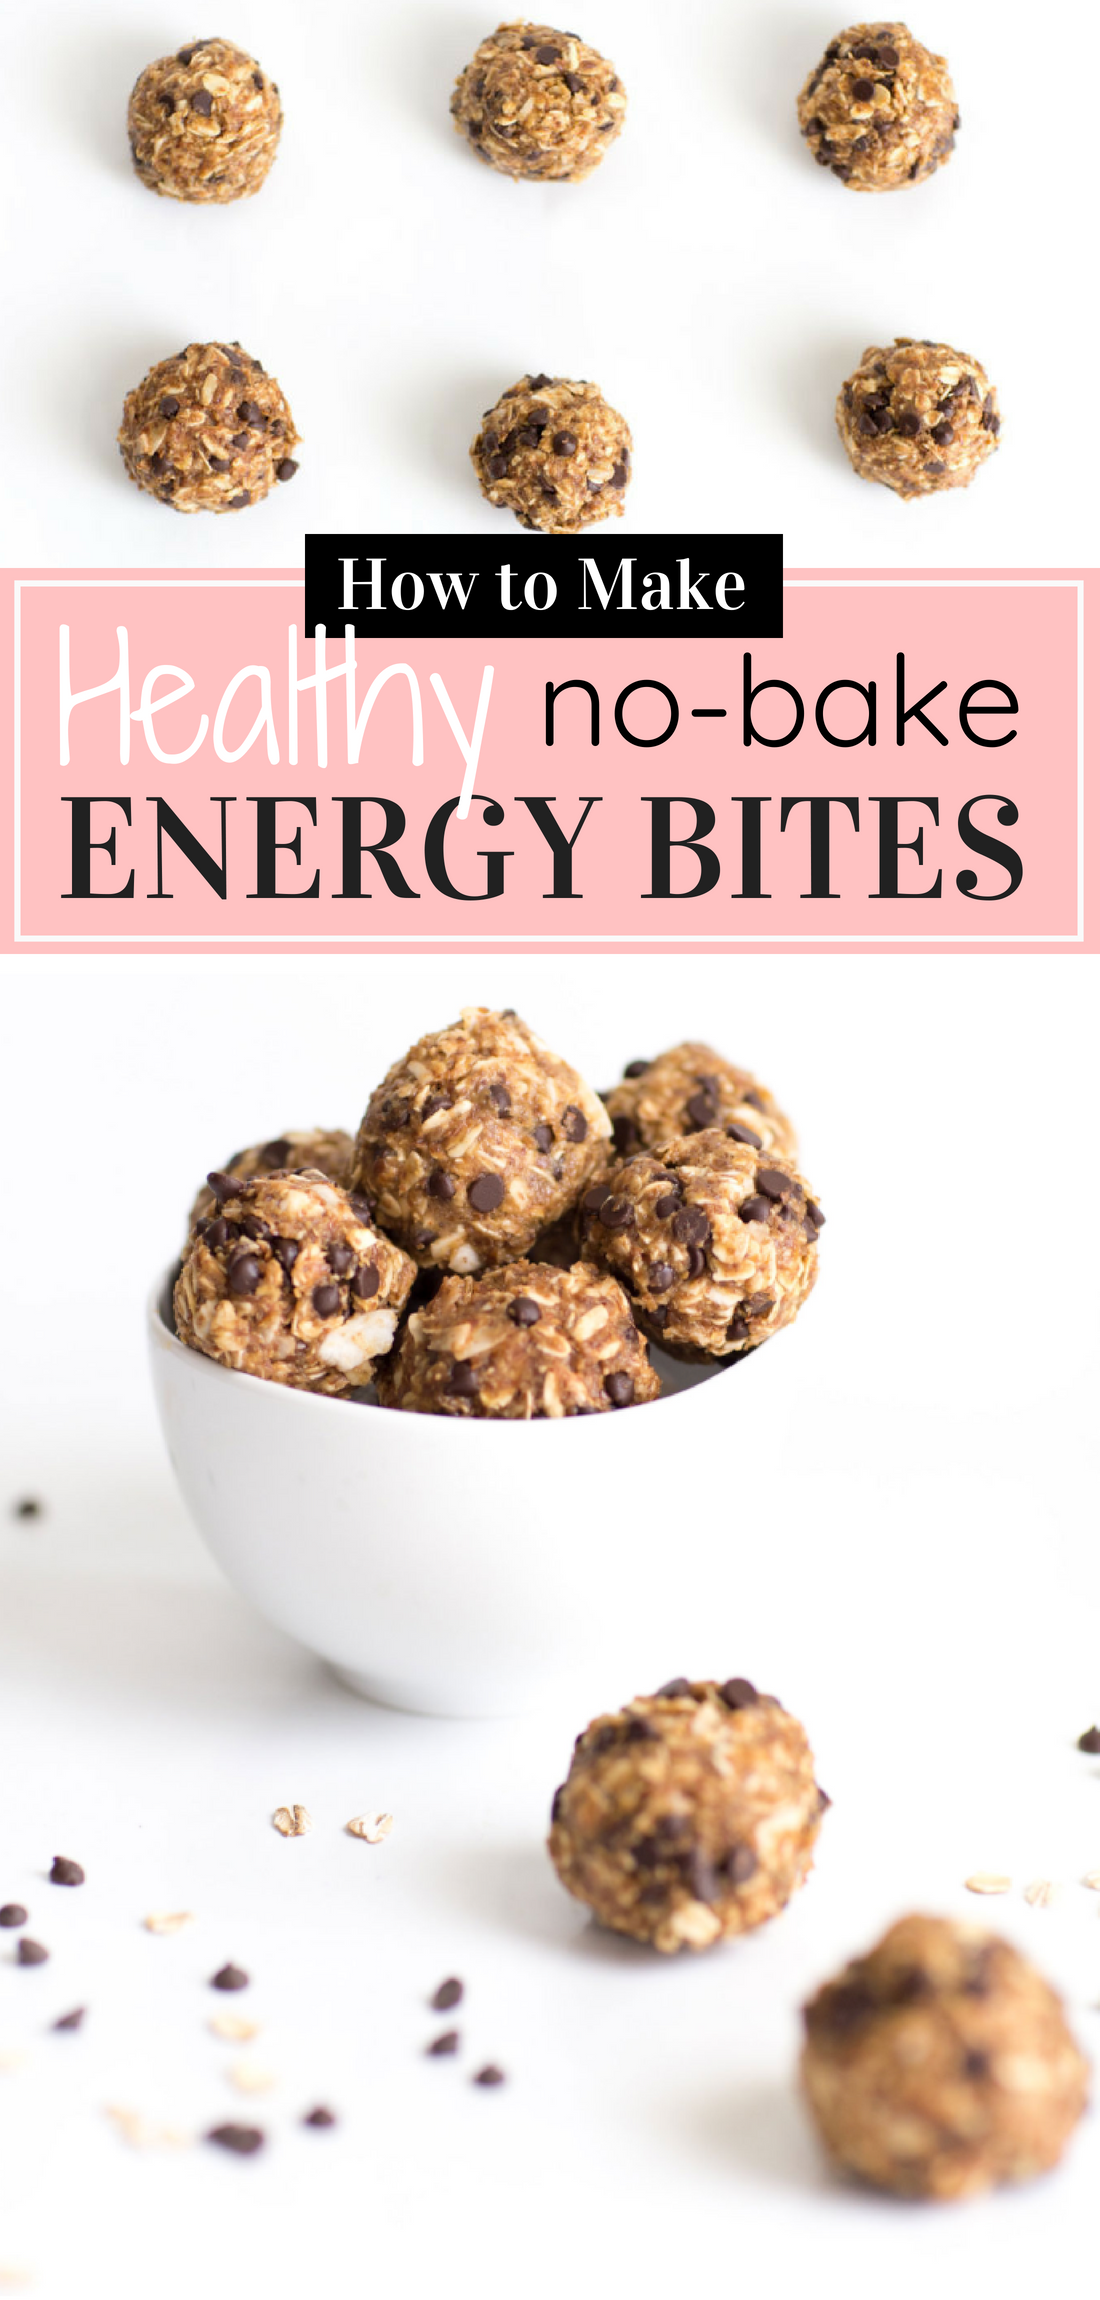 How to make the easiest (yummiest) no-bake healthy energy cookie bites (a.k.a., a guilt-free, dairy-free, and gluten-free way to snack happy!) Psst ... kids LOVE this recipe. #energybites #cookies #healthycookies #nobakecookies #nobake #healthydessert #healthysnack #snack #glutenfree #dairyfree Click through for the recipe. | glitterinc.com | @glitterinc